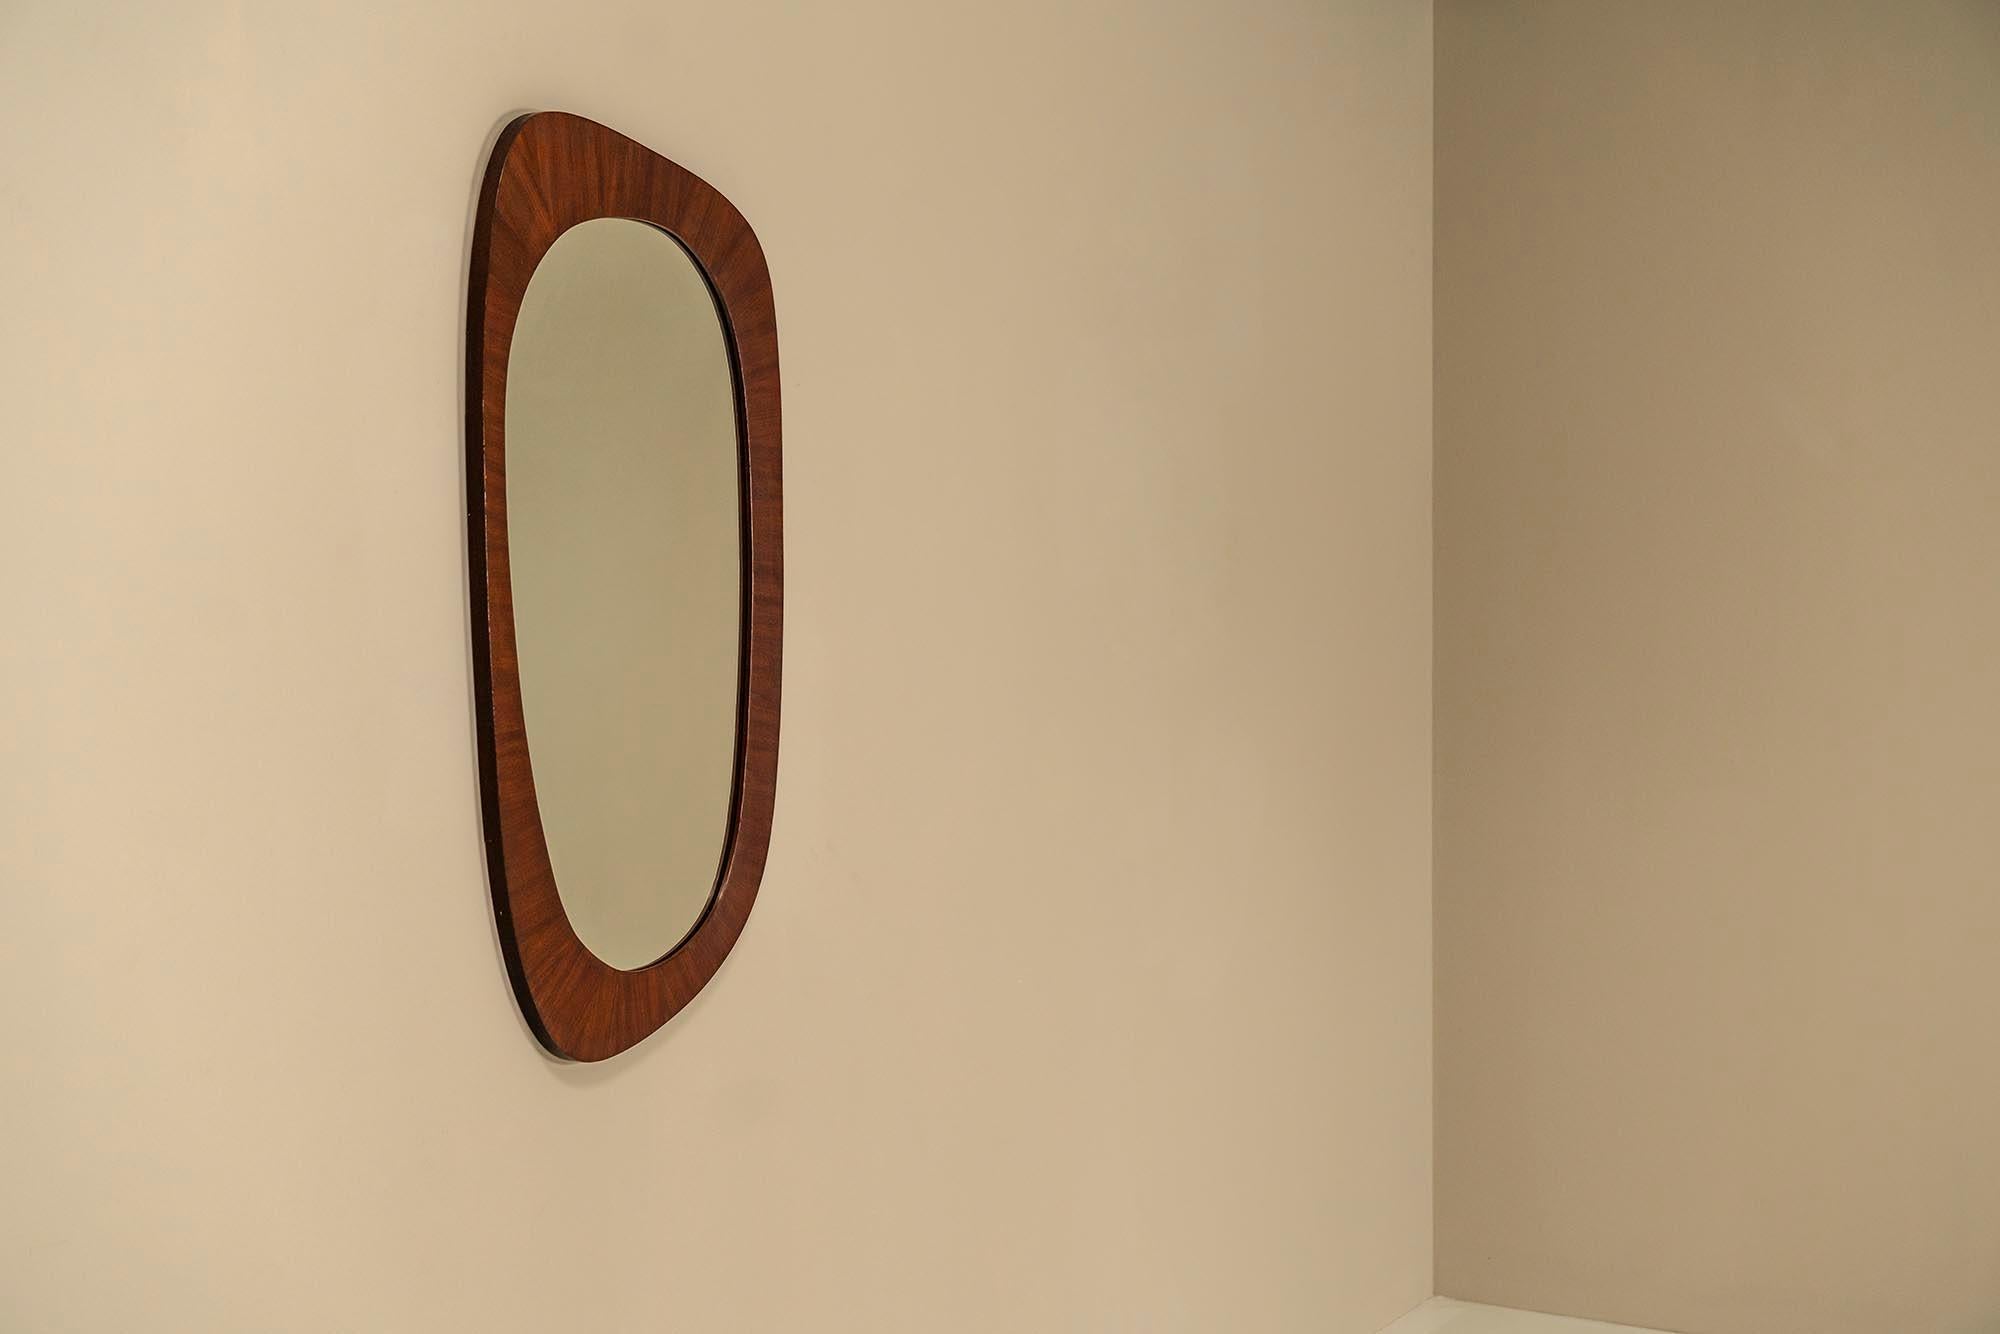 Organic shaped mirror in teak.In addition to its function, this well-formed mirror from the 1970s has a high decorative value. It has a groovy design and makes up for a wonderful object to decorate the room.The organic or asymmetrical shape has a